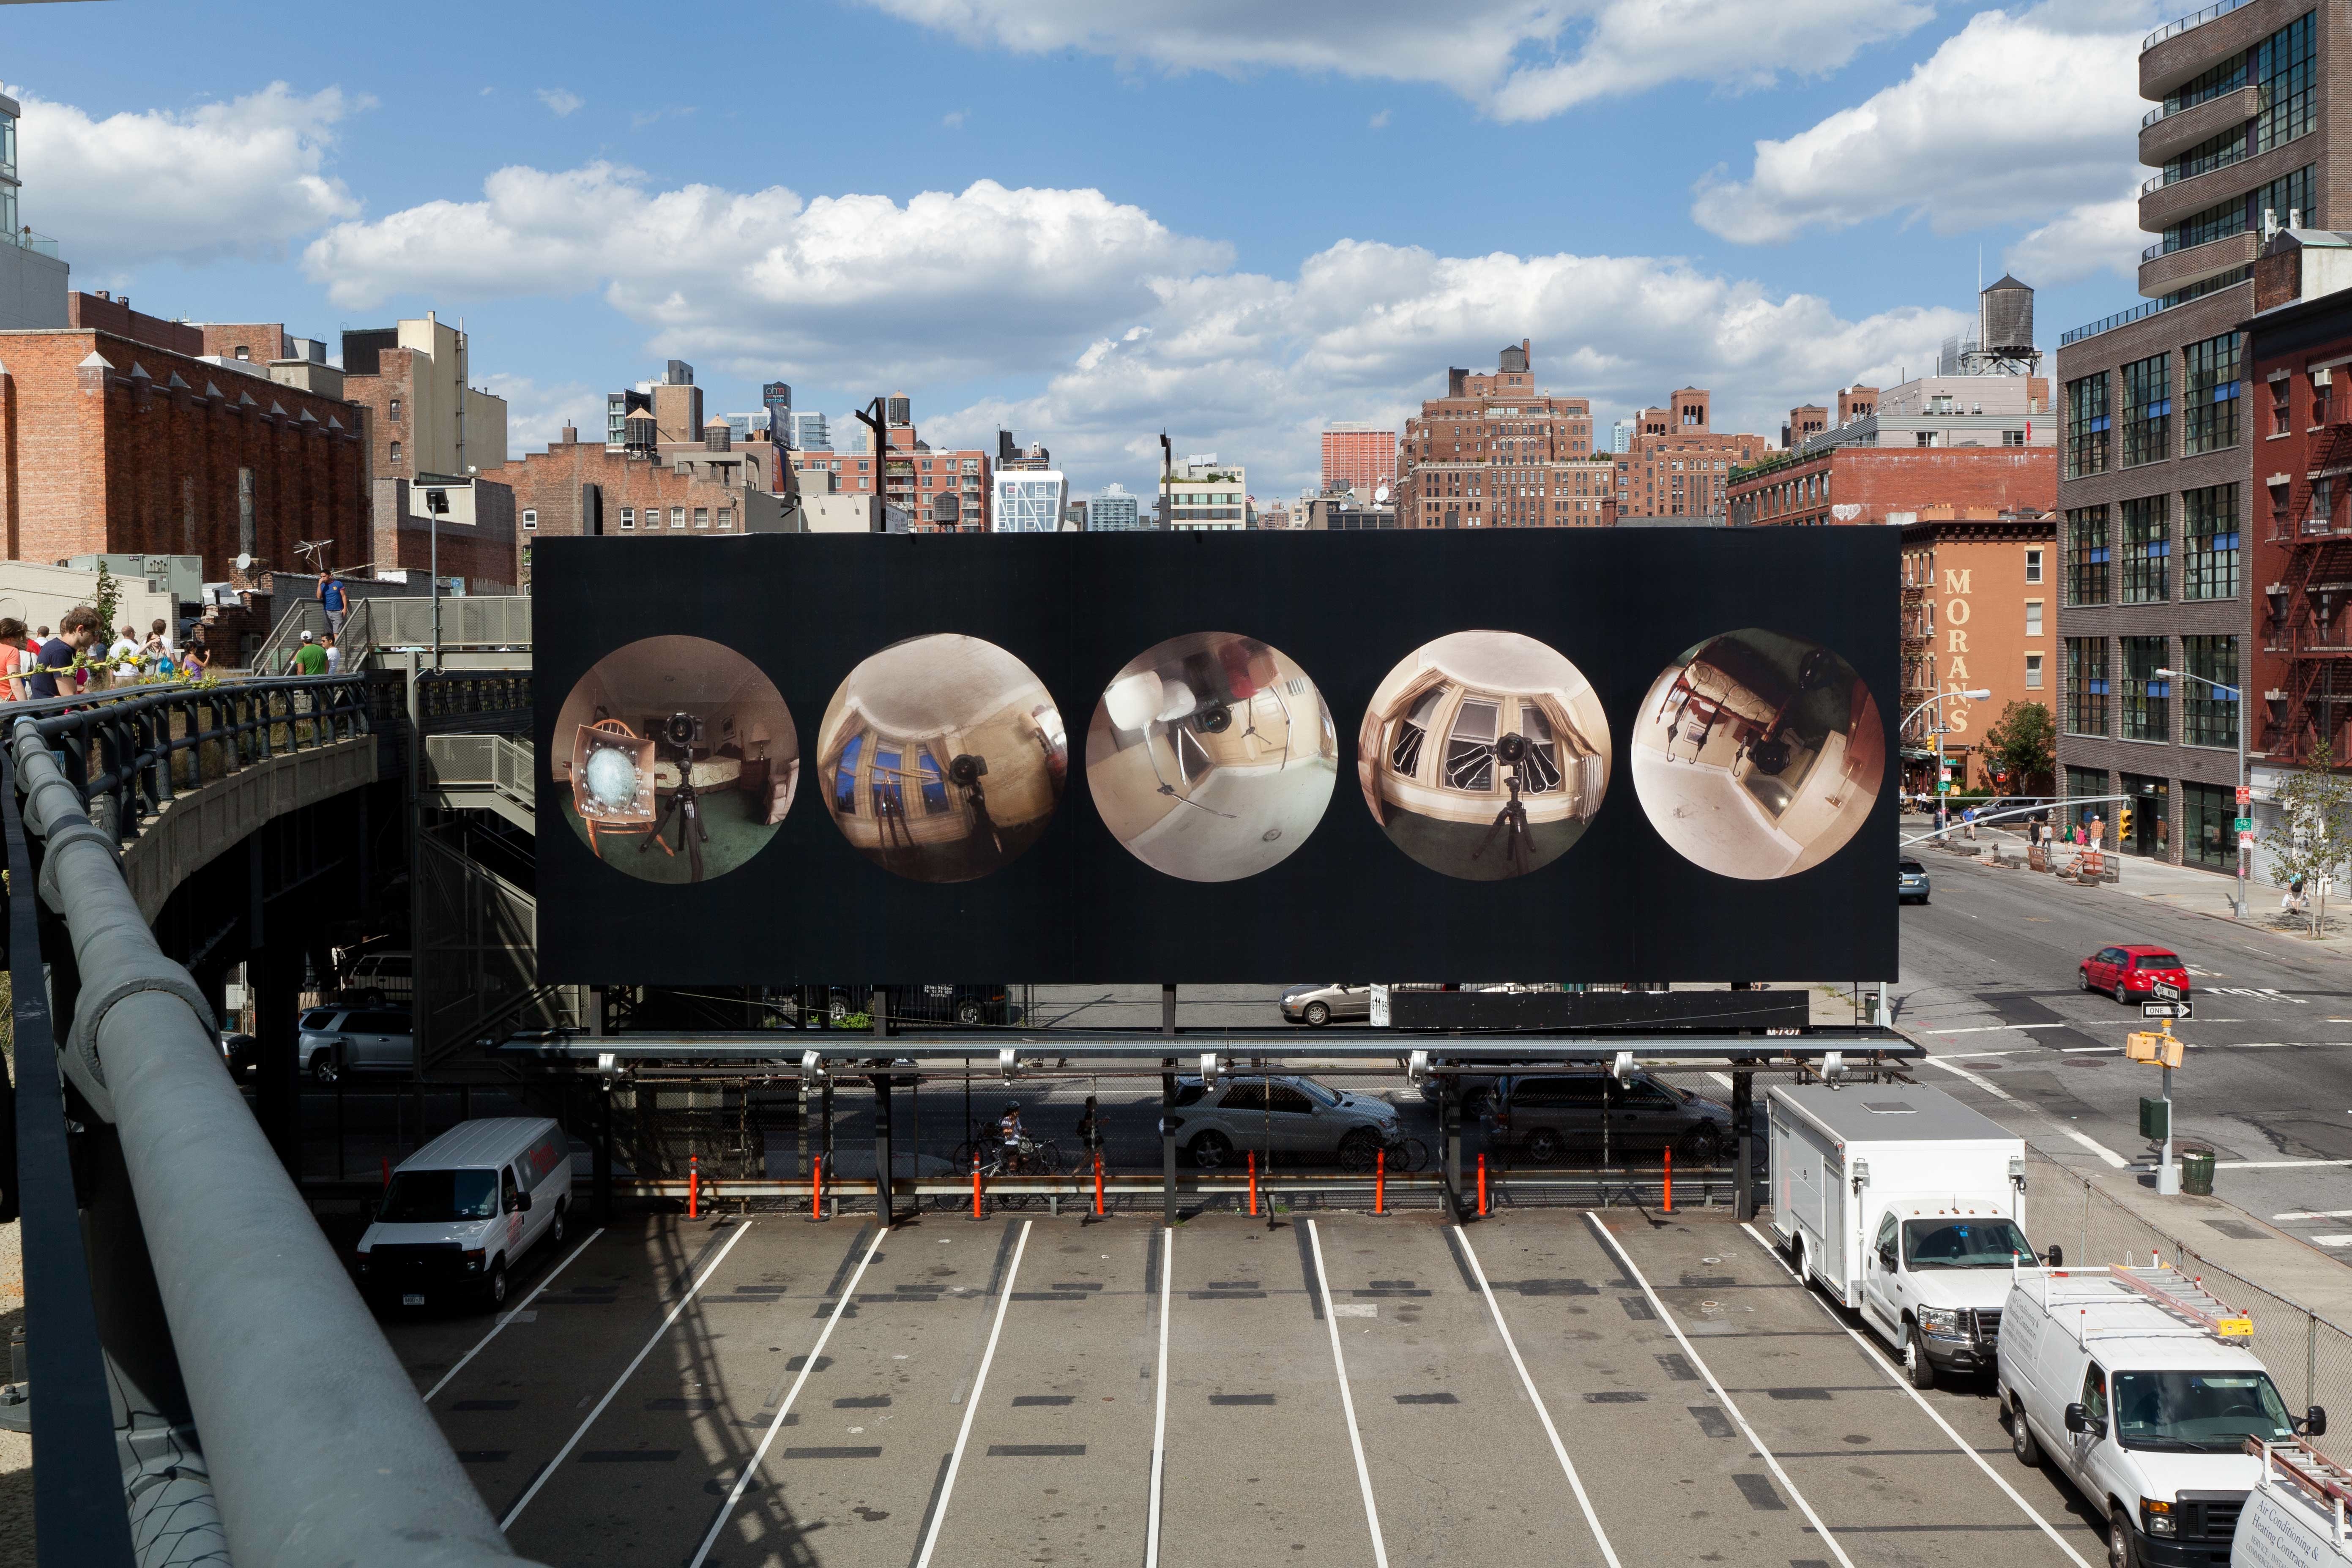 Telescopic planetary views inform this billboard commissioned by the High Line. Voyeuristic scenes of hotel rooms depict mundane objects spontaneously arranged to contemplate the act of looking, assemblage, and the planet Jupiter. Notions of improvisation were amplified during the show’s run with weekly performances based on John Coltrane‘s jazz composition “Jupiter.”